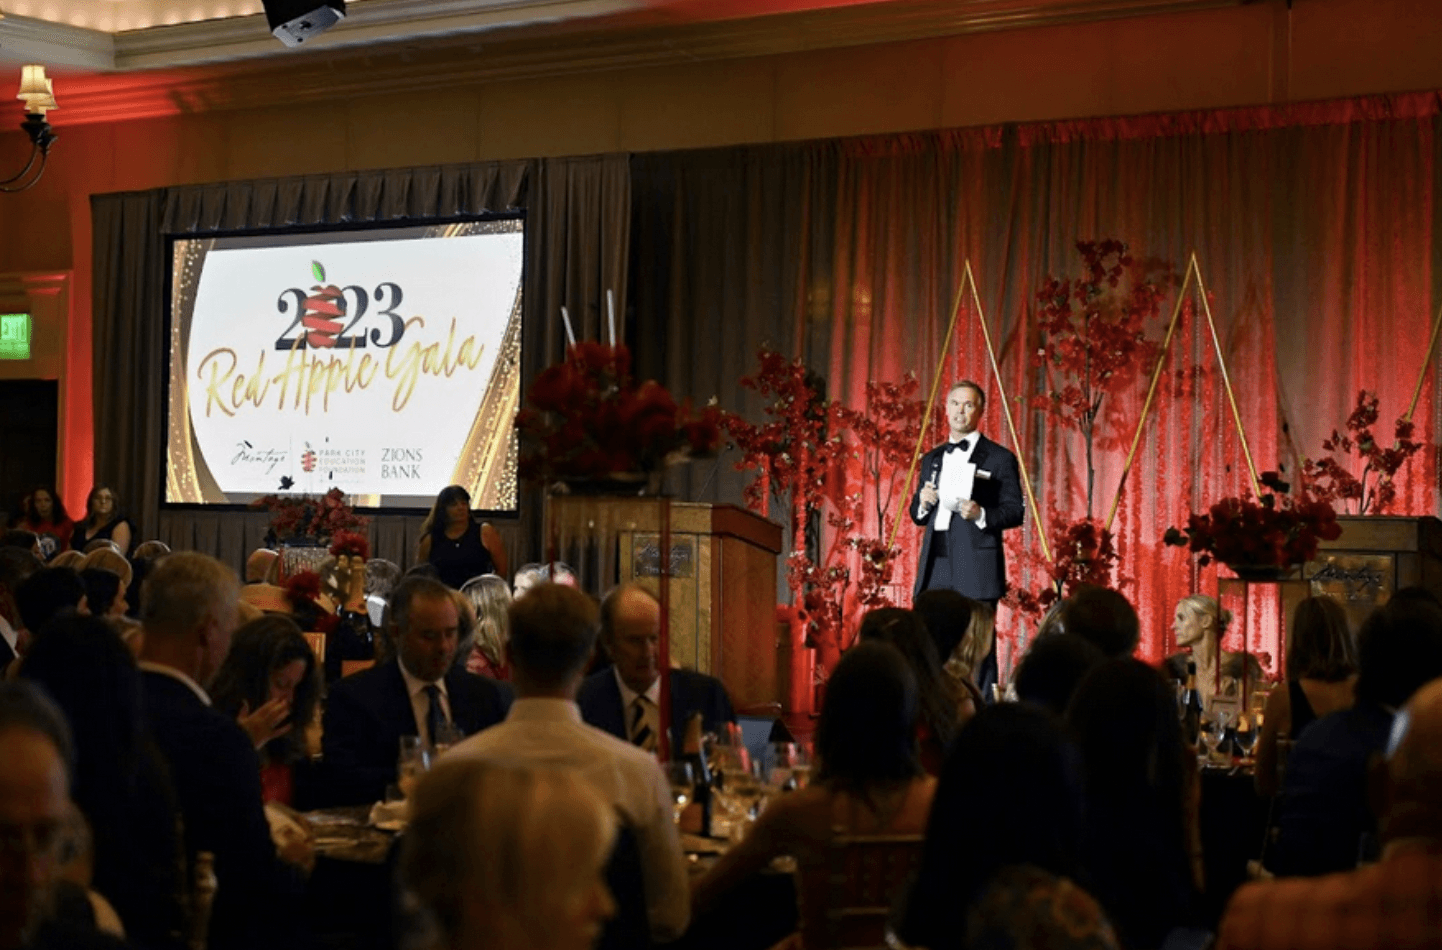 Red Apple Gala puts the Shine on Fundraising for School Programs